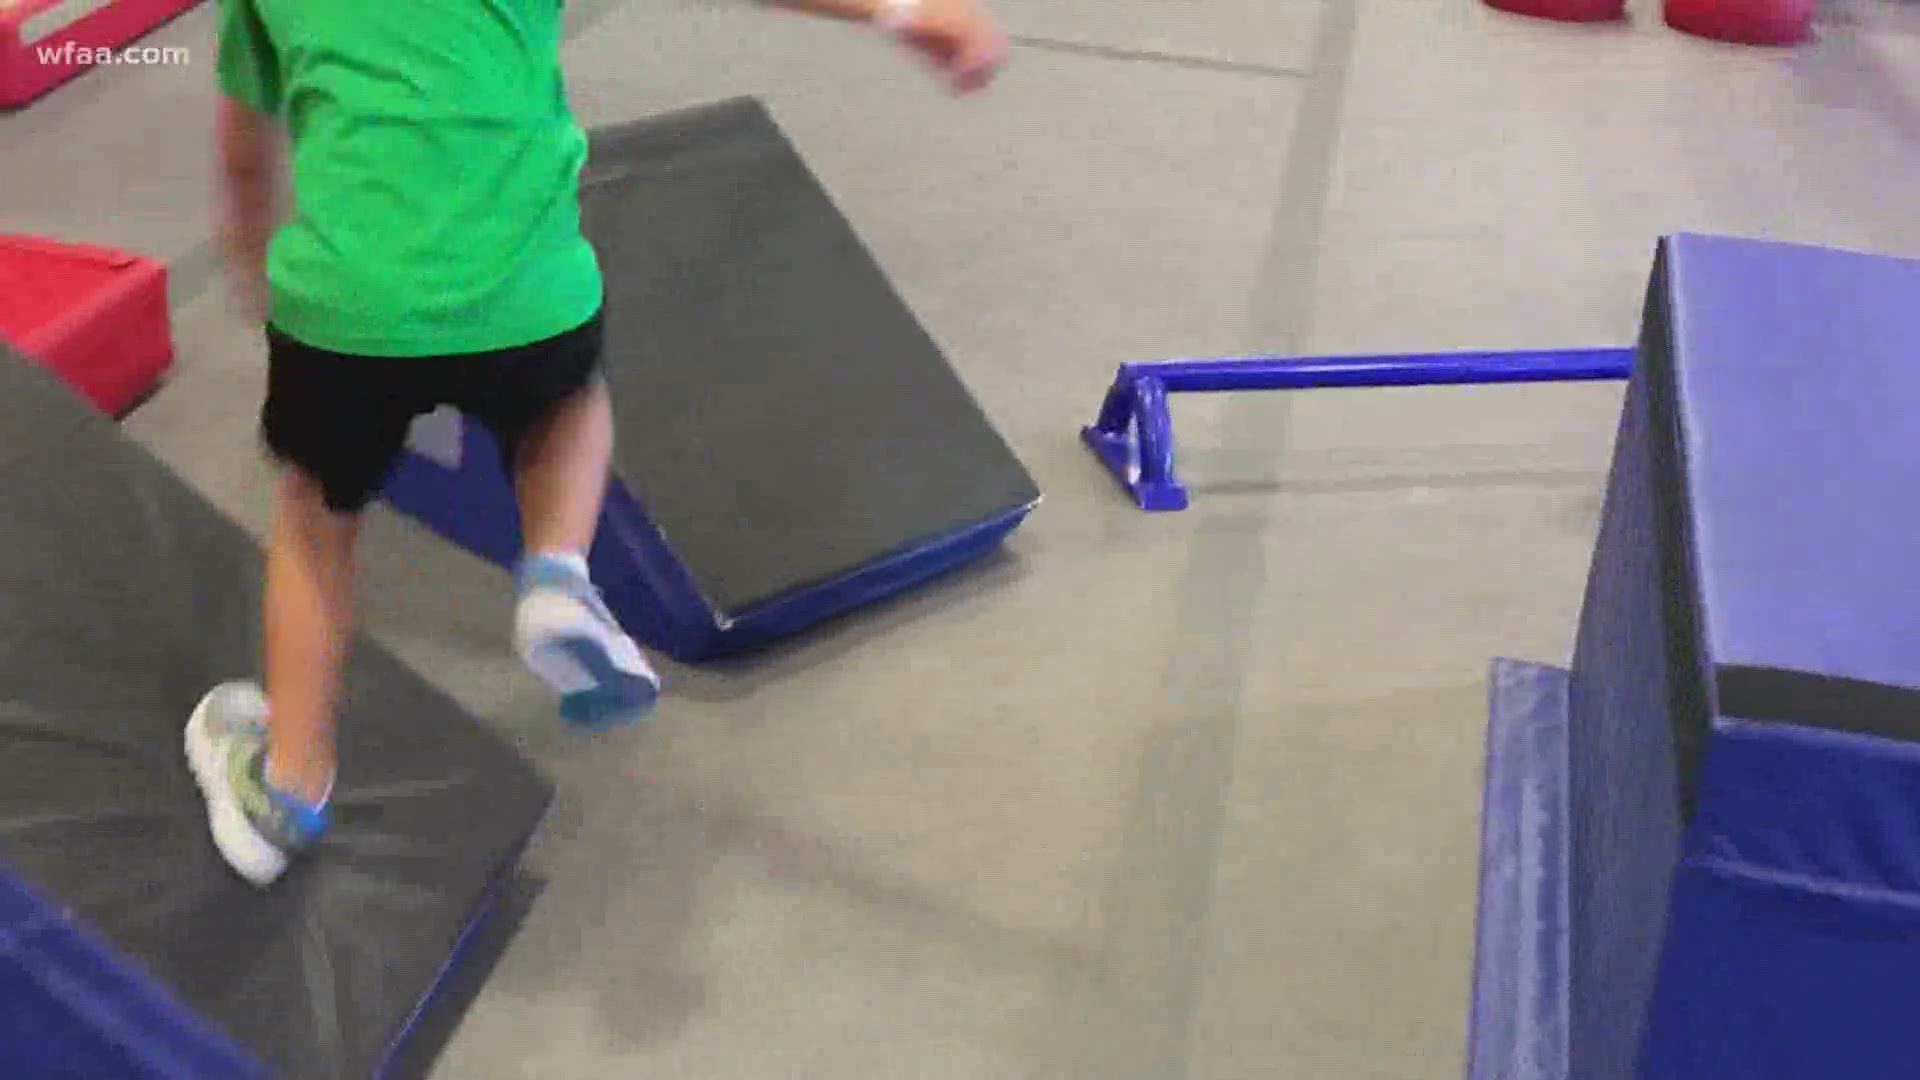 In addition to being great exercise, the Ninja Nation obstacle courses teach kids not to fear failure.